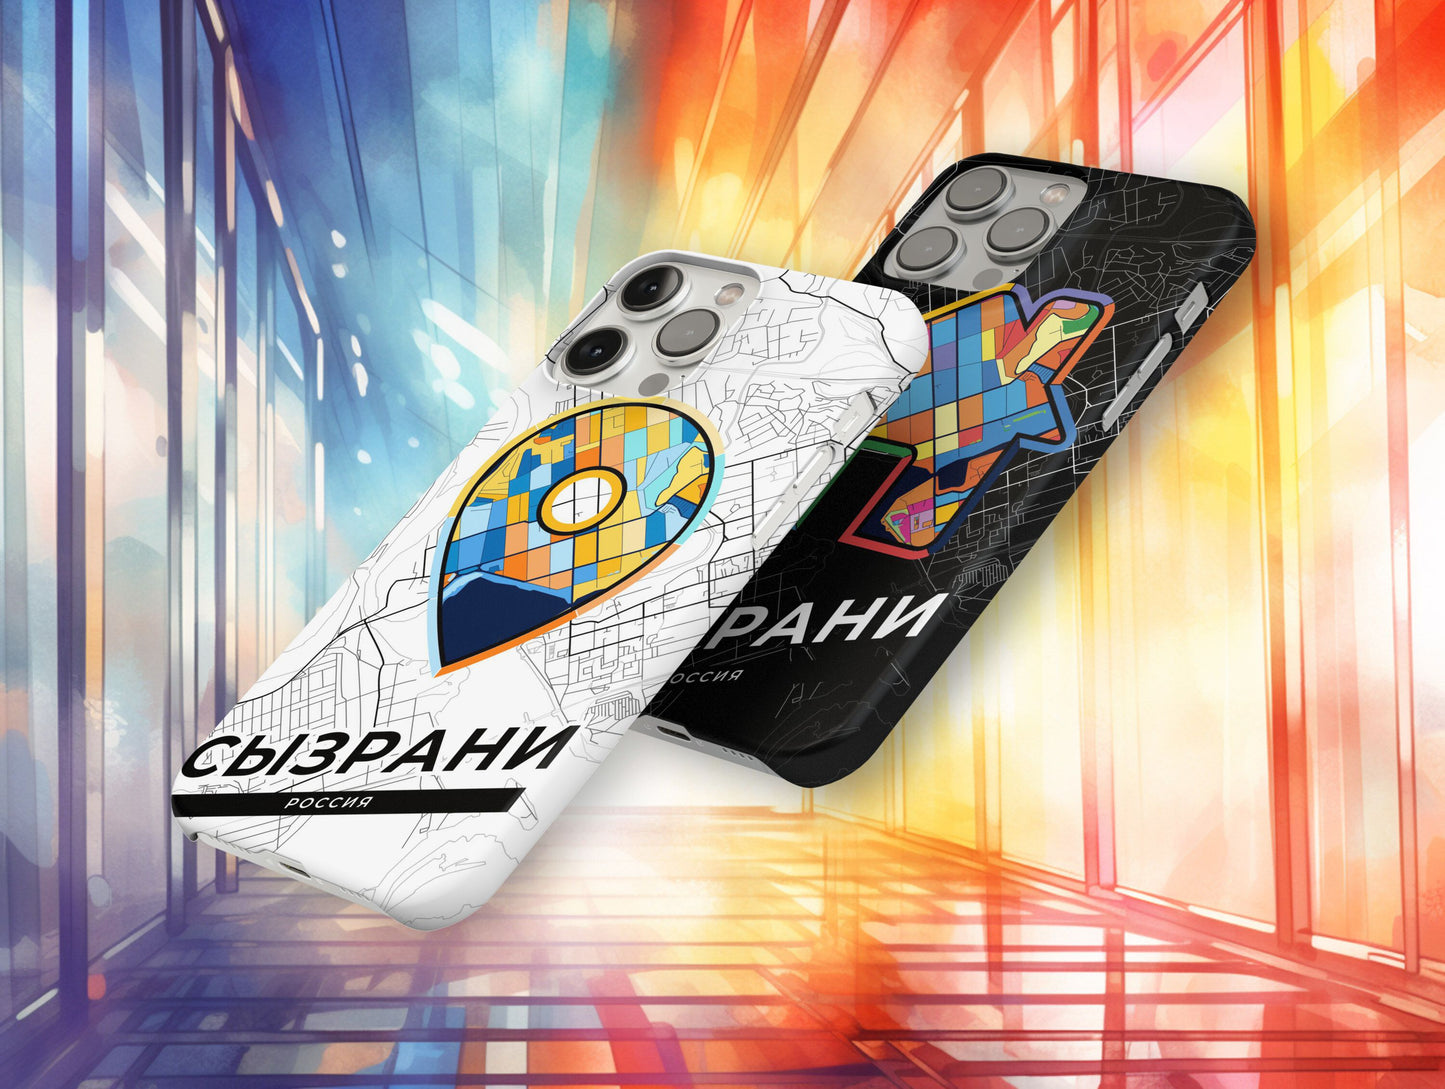 Syzran Russia slim phone case with colorful icon